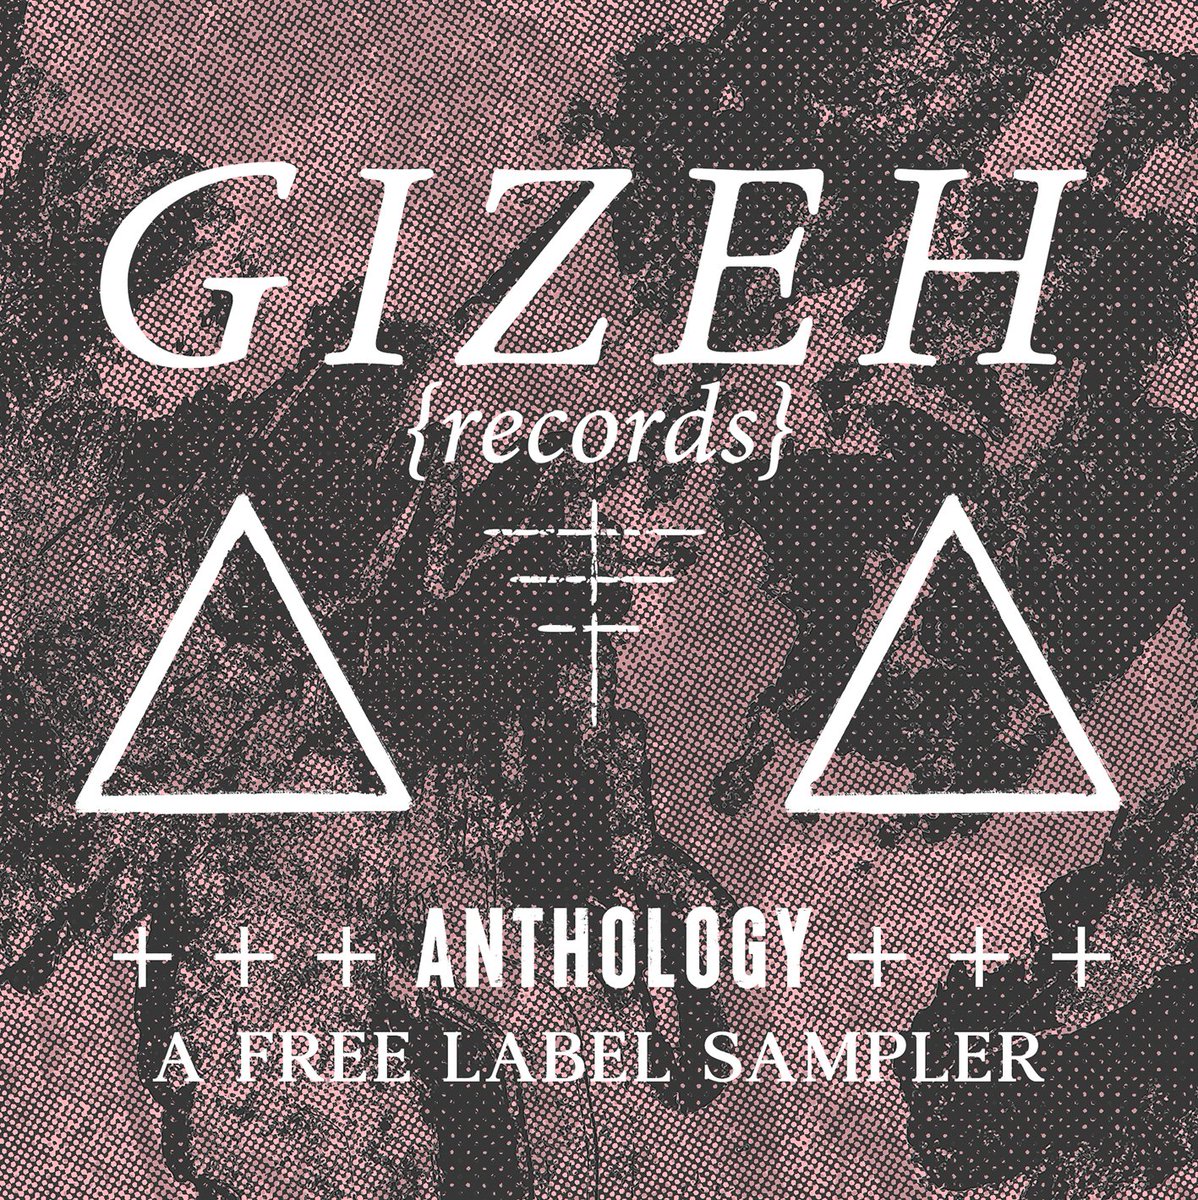 ::: ANTHOLOGY ::: A 35 track collection of music taken from the label catalogue. Free to download via Bandcamp or feel free to donate if you wish. gizehrecords.bandcamp.com/album/antholog…